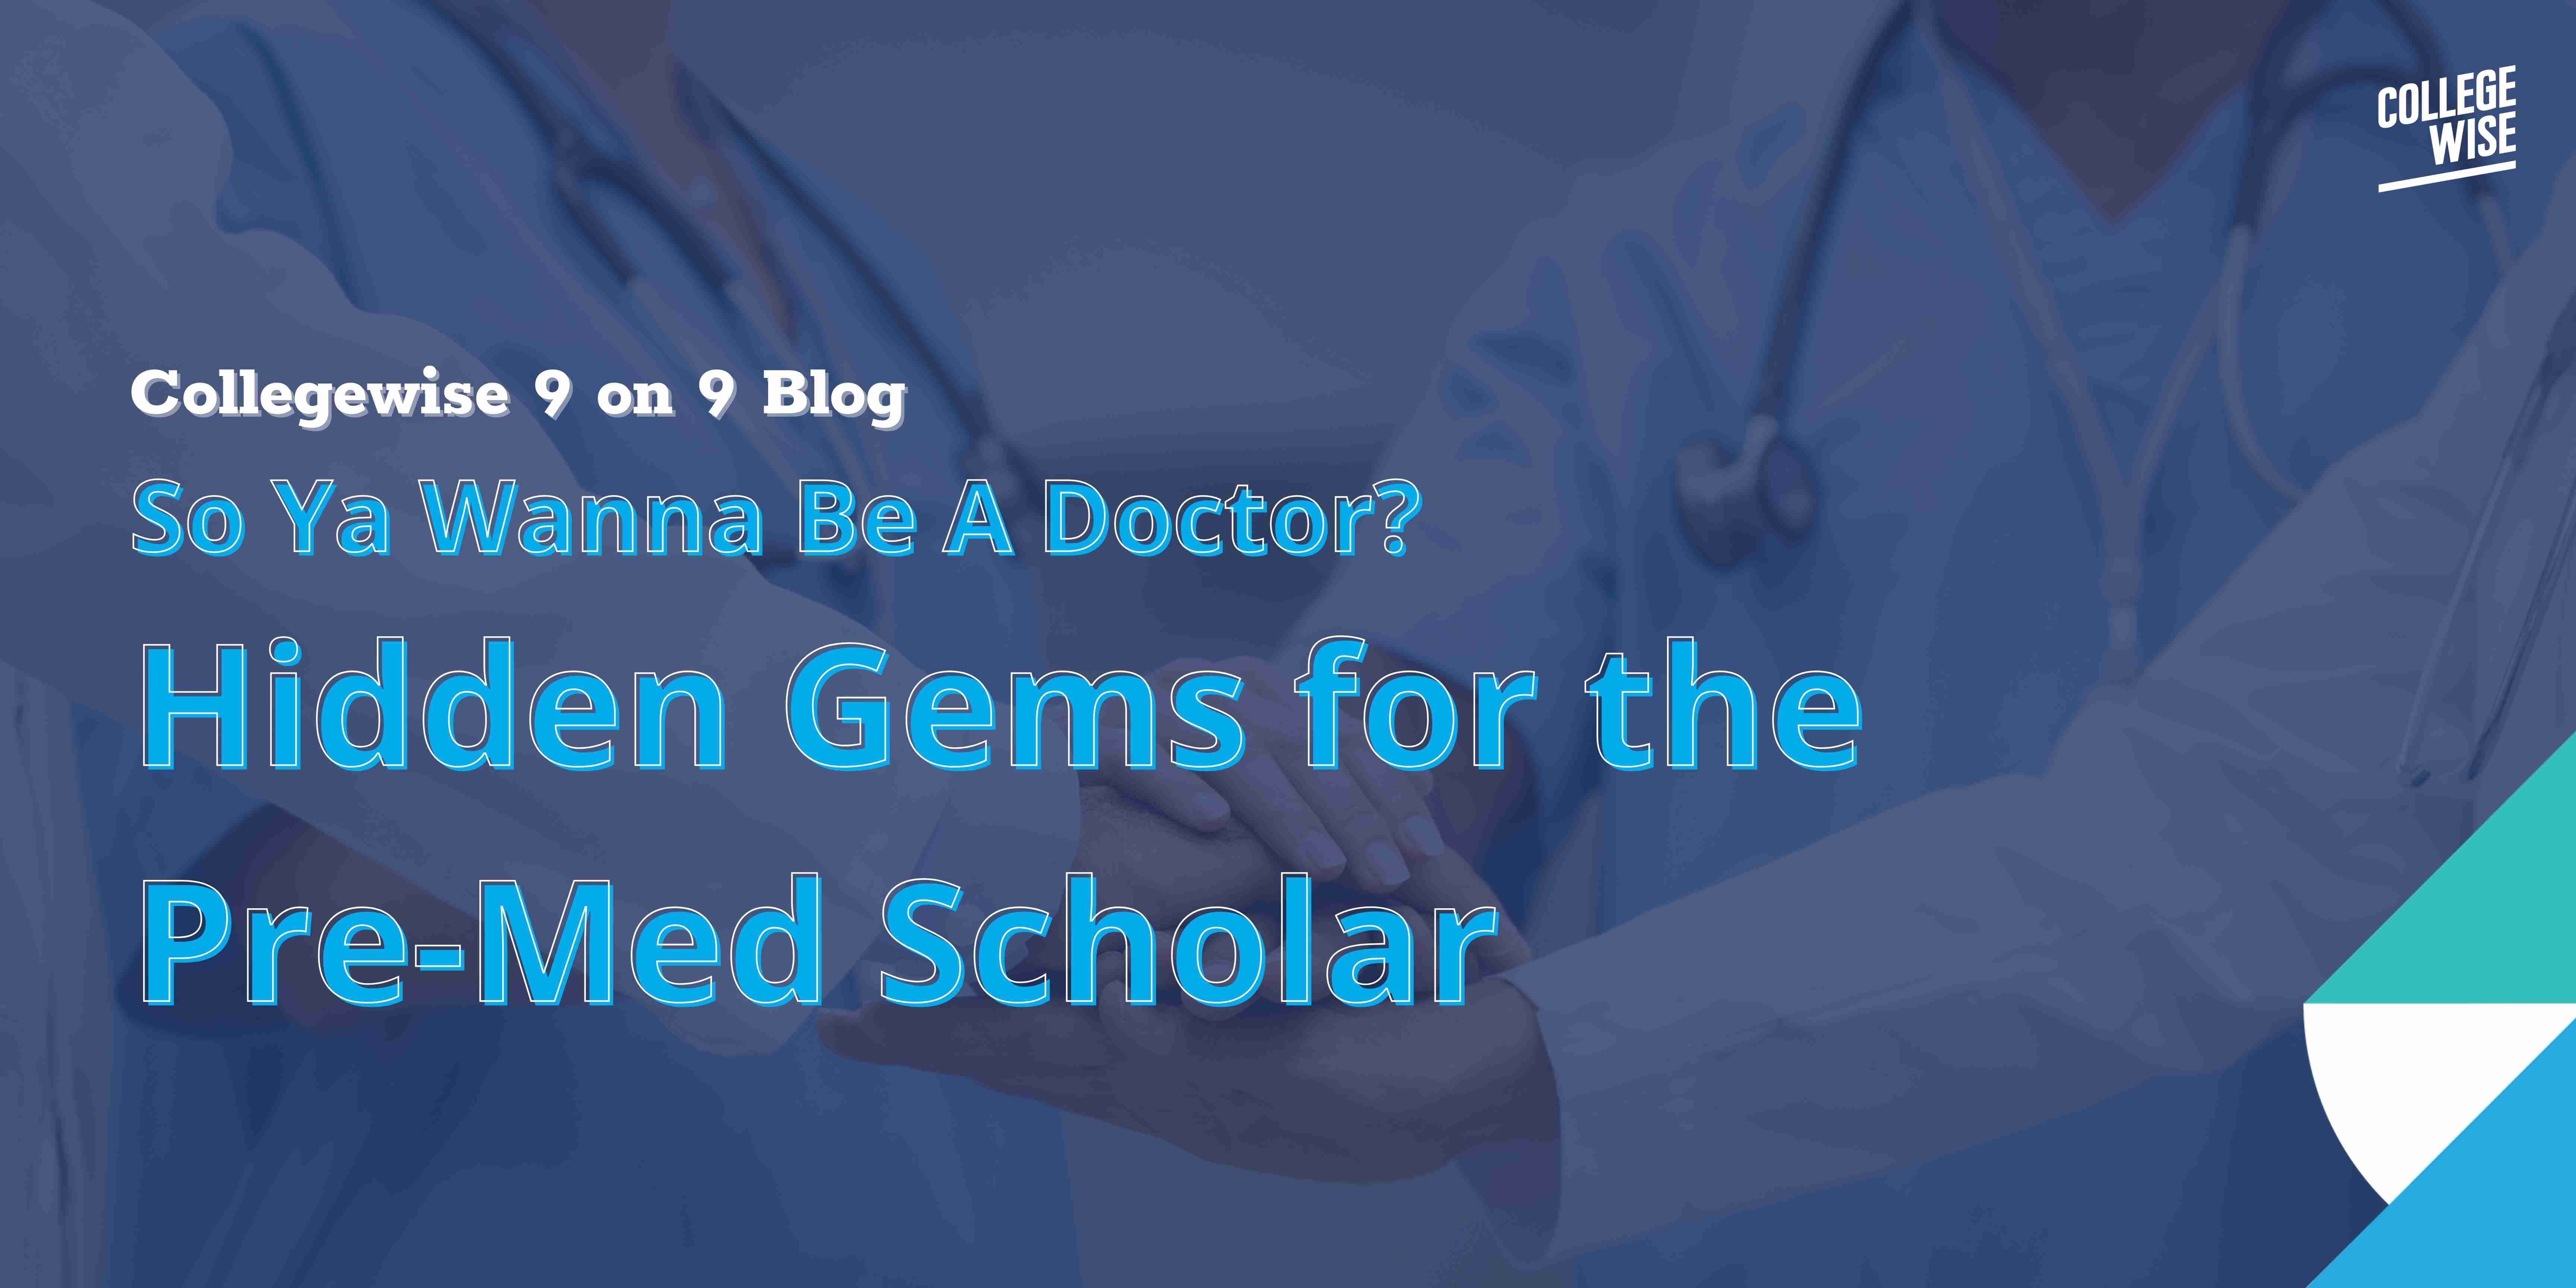 Want to be a doctor? Pre-med college hidden gems